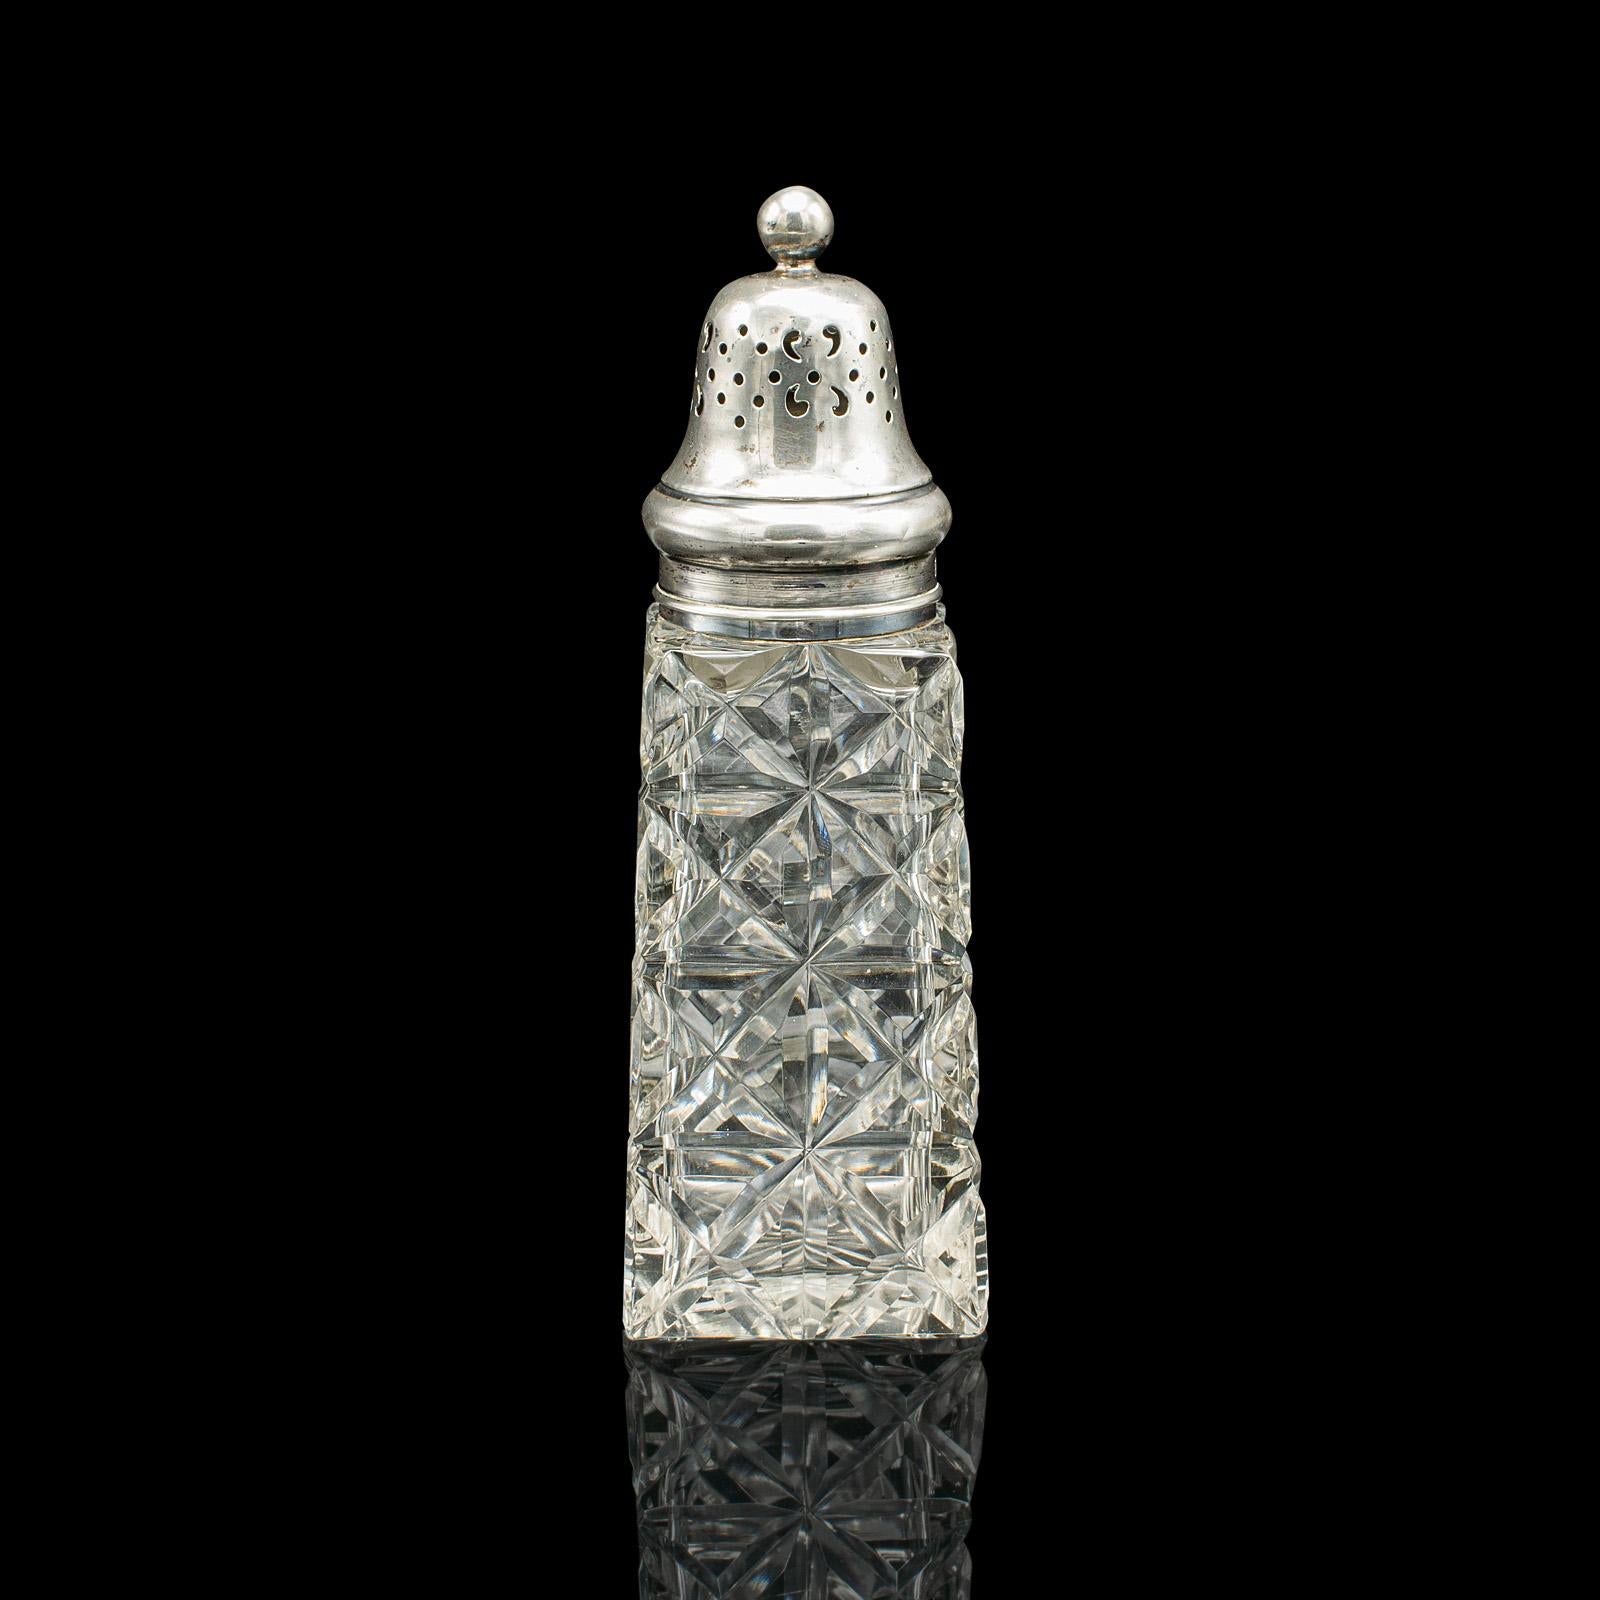 Vintage Sugar Shaker, English, Glass, Sterling Silver, Caster, Hallmarked 1929 In Good Condition For Sale In Hele, Devon, GB